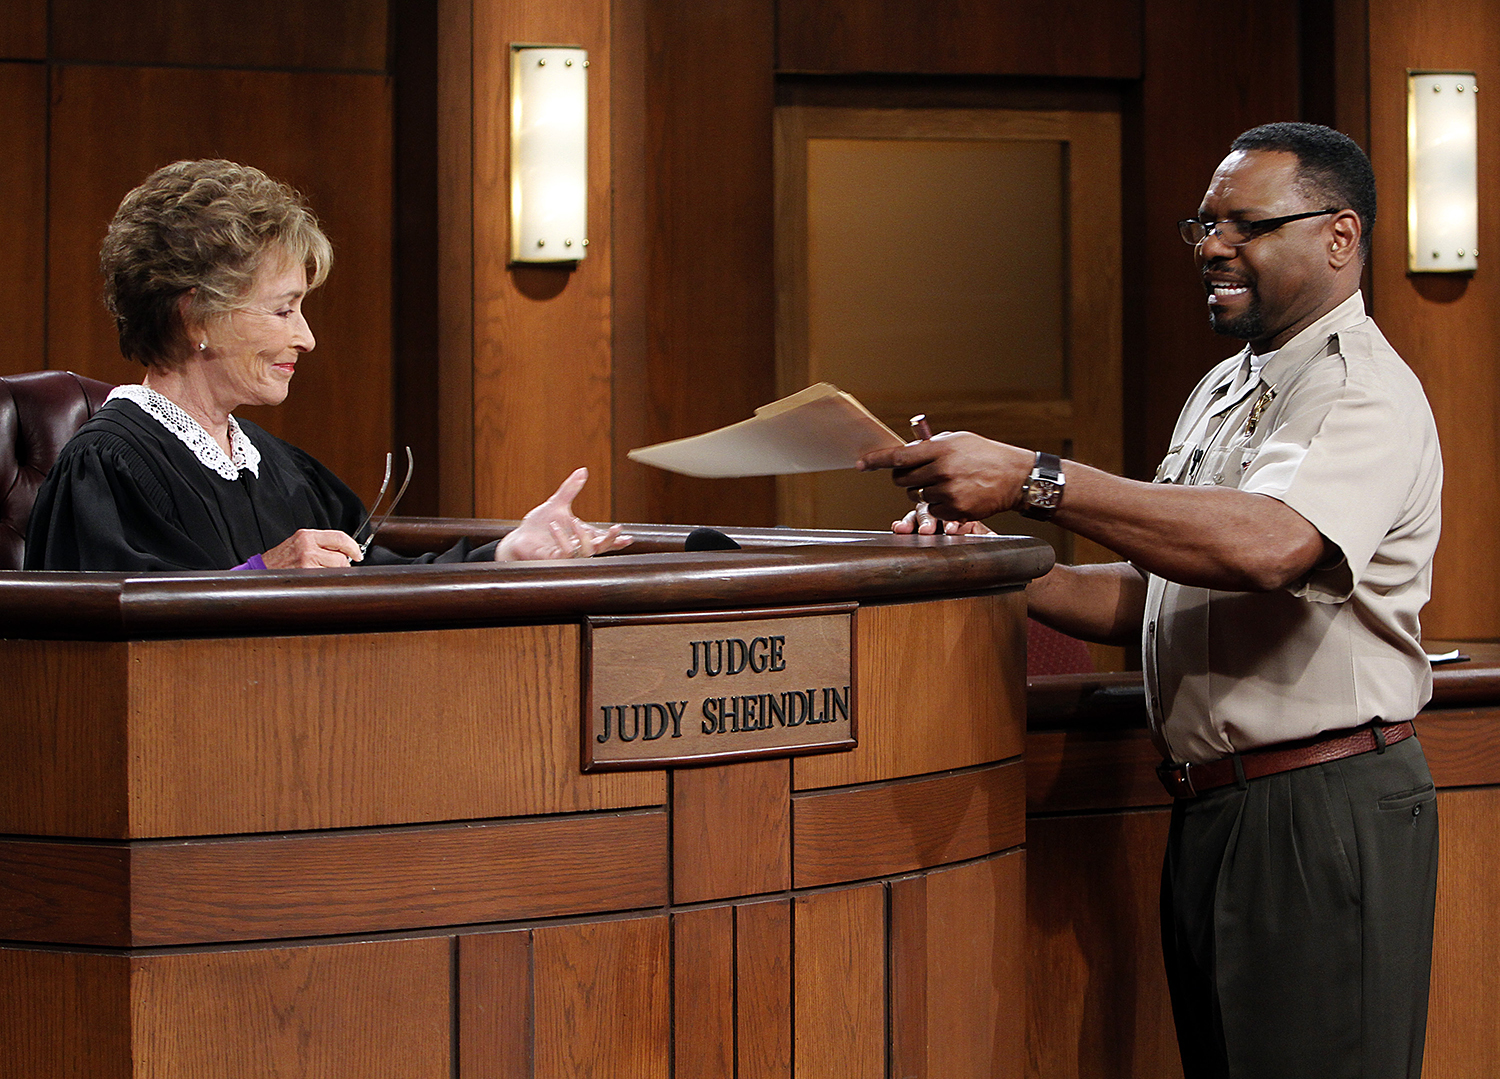 Judy Judge replaces original Bailiff for new show called ‘Justice Judy’